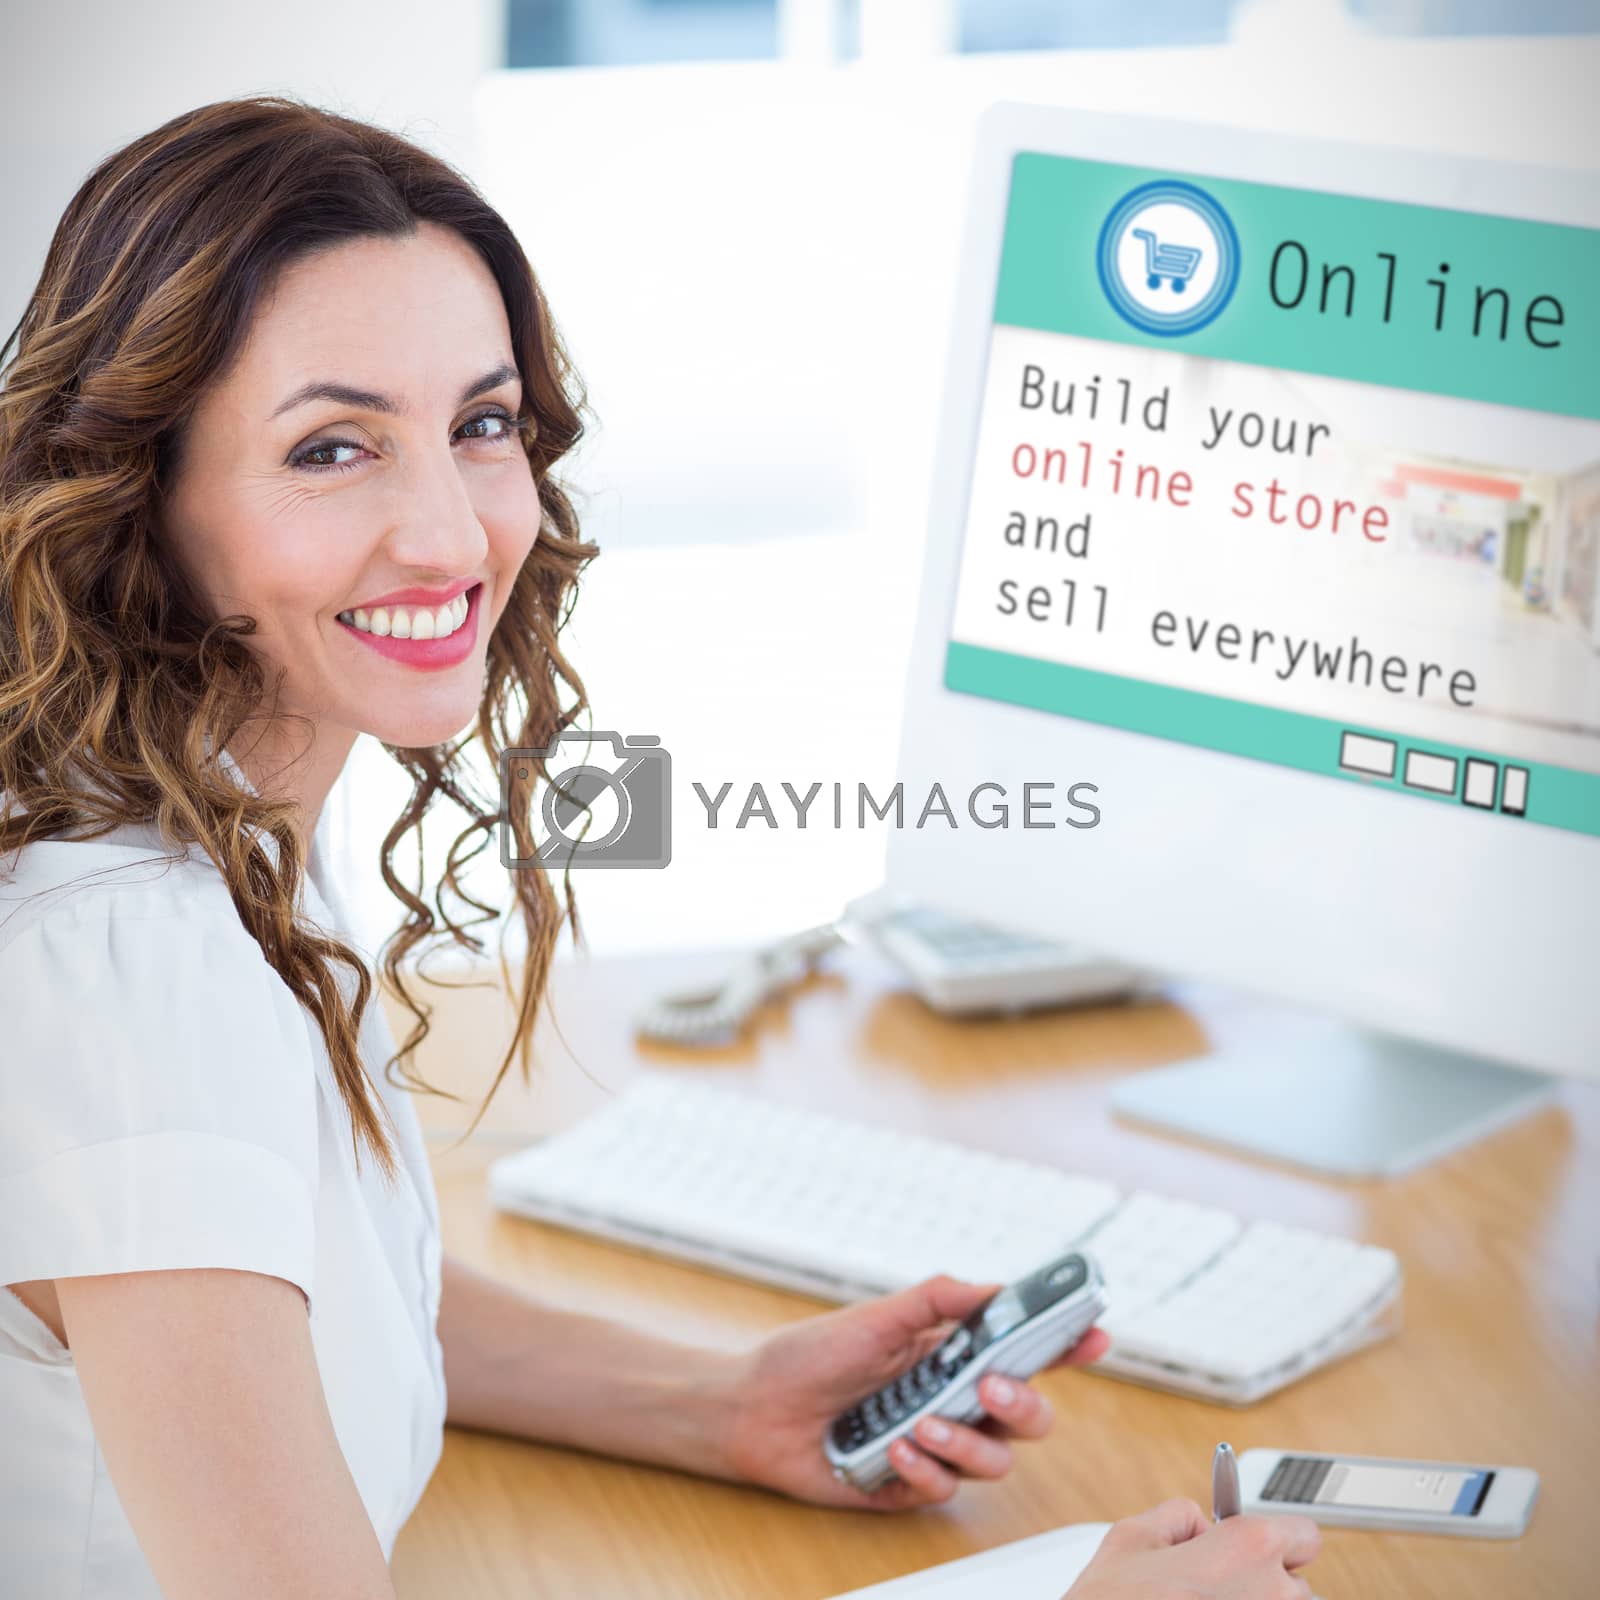 Royalty free image of Composite image of smiling businesswoman looking at camera by Wavebreakmedia